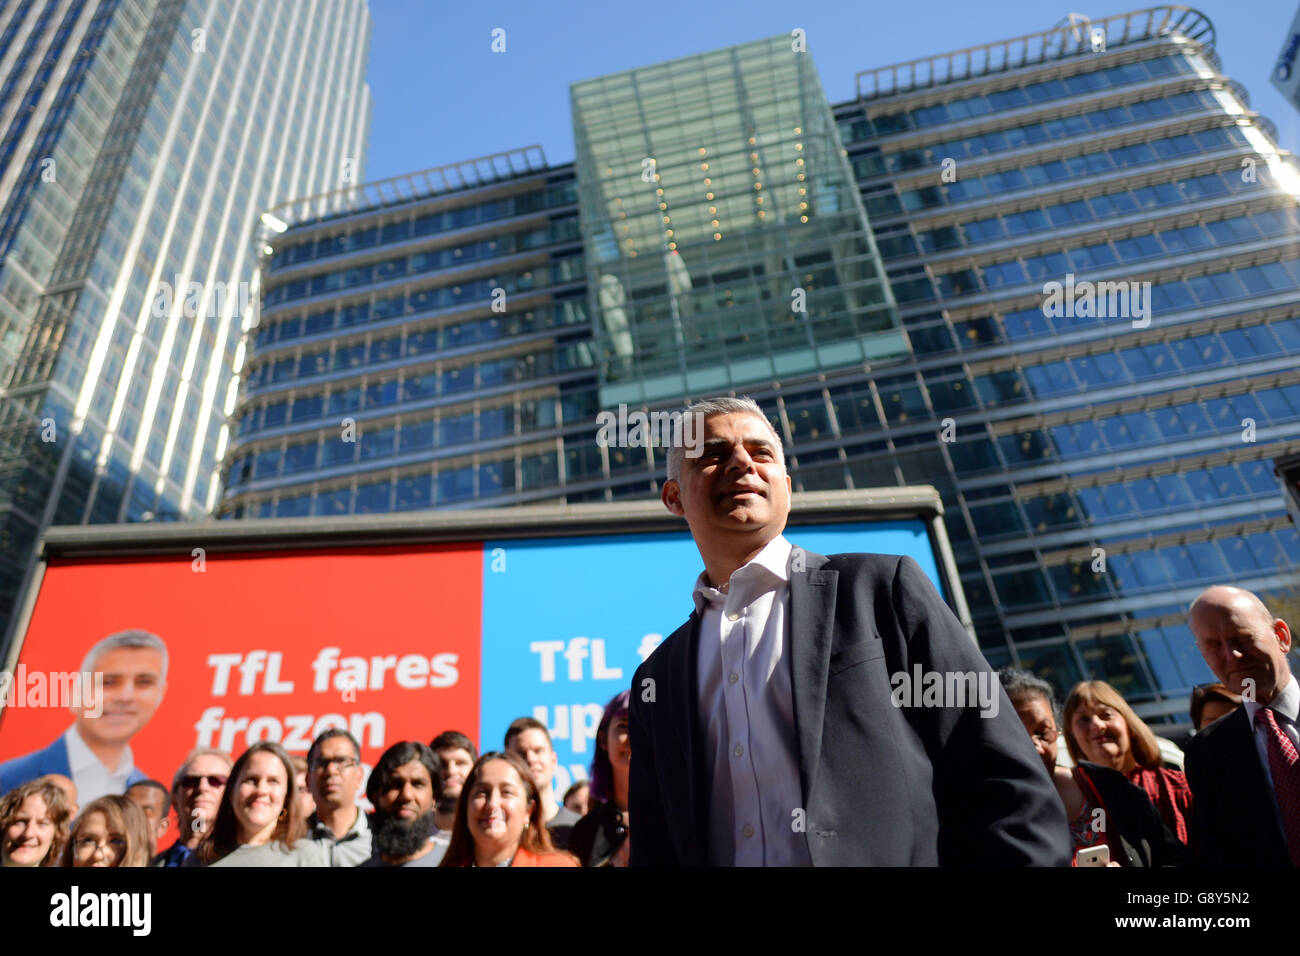 Sadiq Khan, Labour's Candidate for Mayor of London, speaks in front of Labour's four campaign adverts at Montgomery Square in Canary Wharf, London. Stock Photo